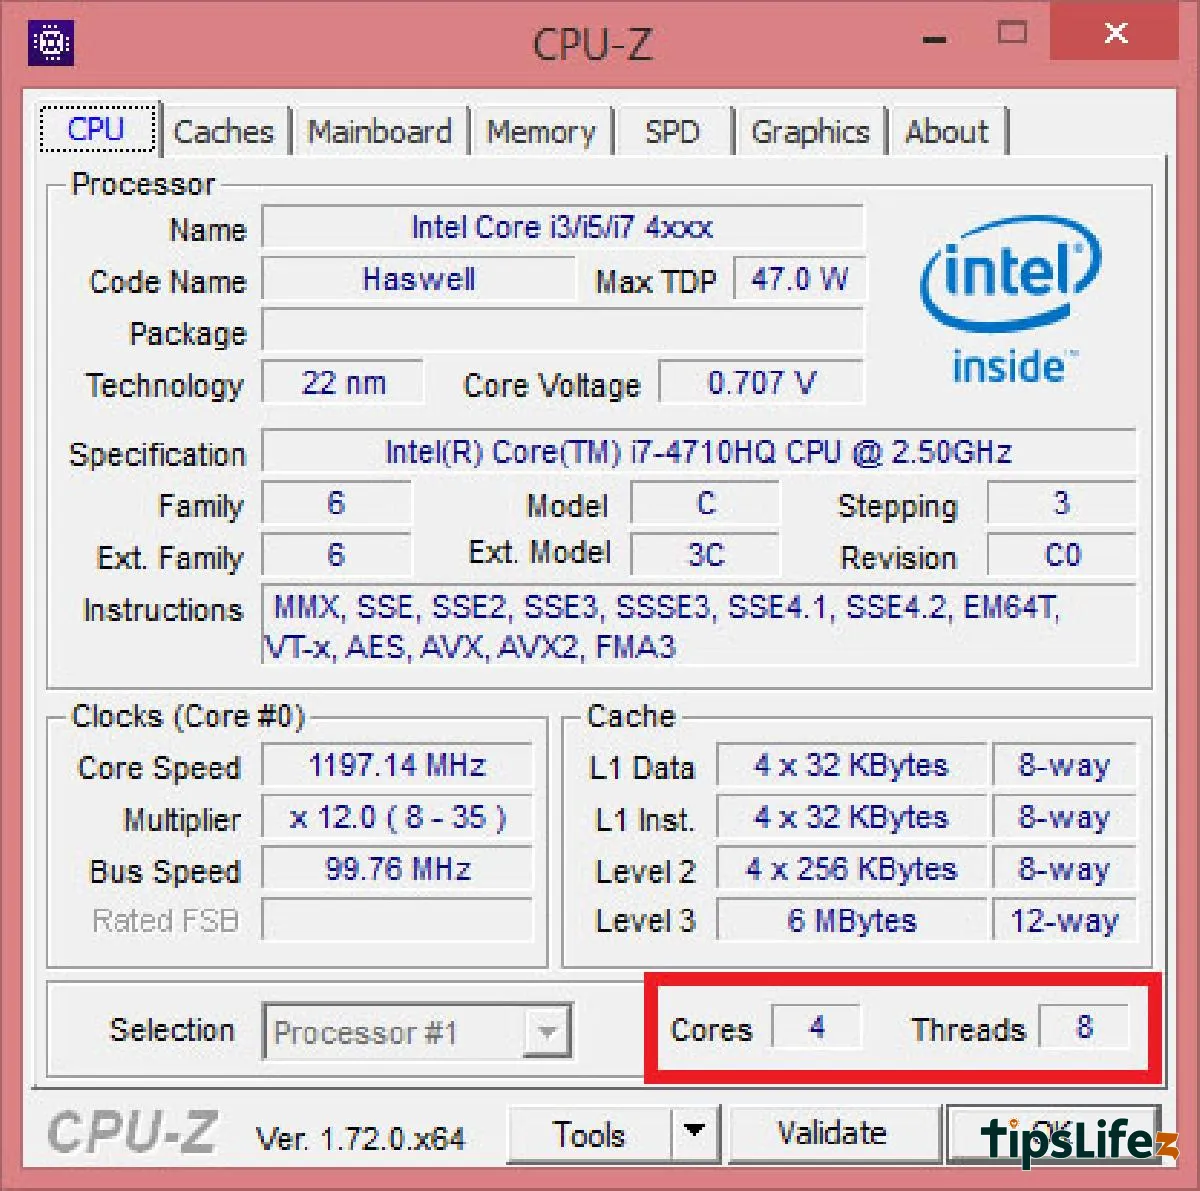 How to check graphics card using CPU-Z software